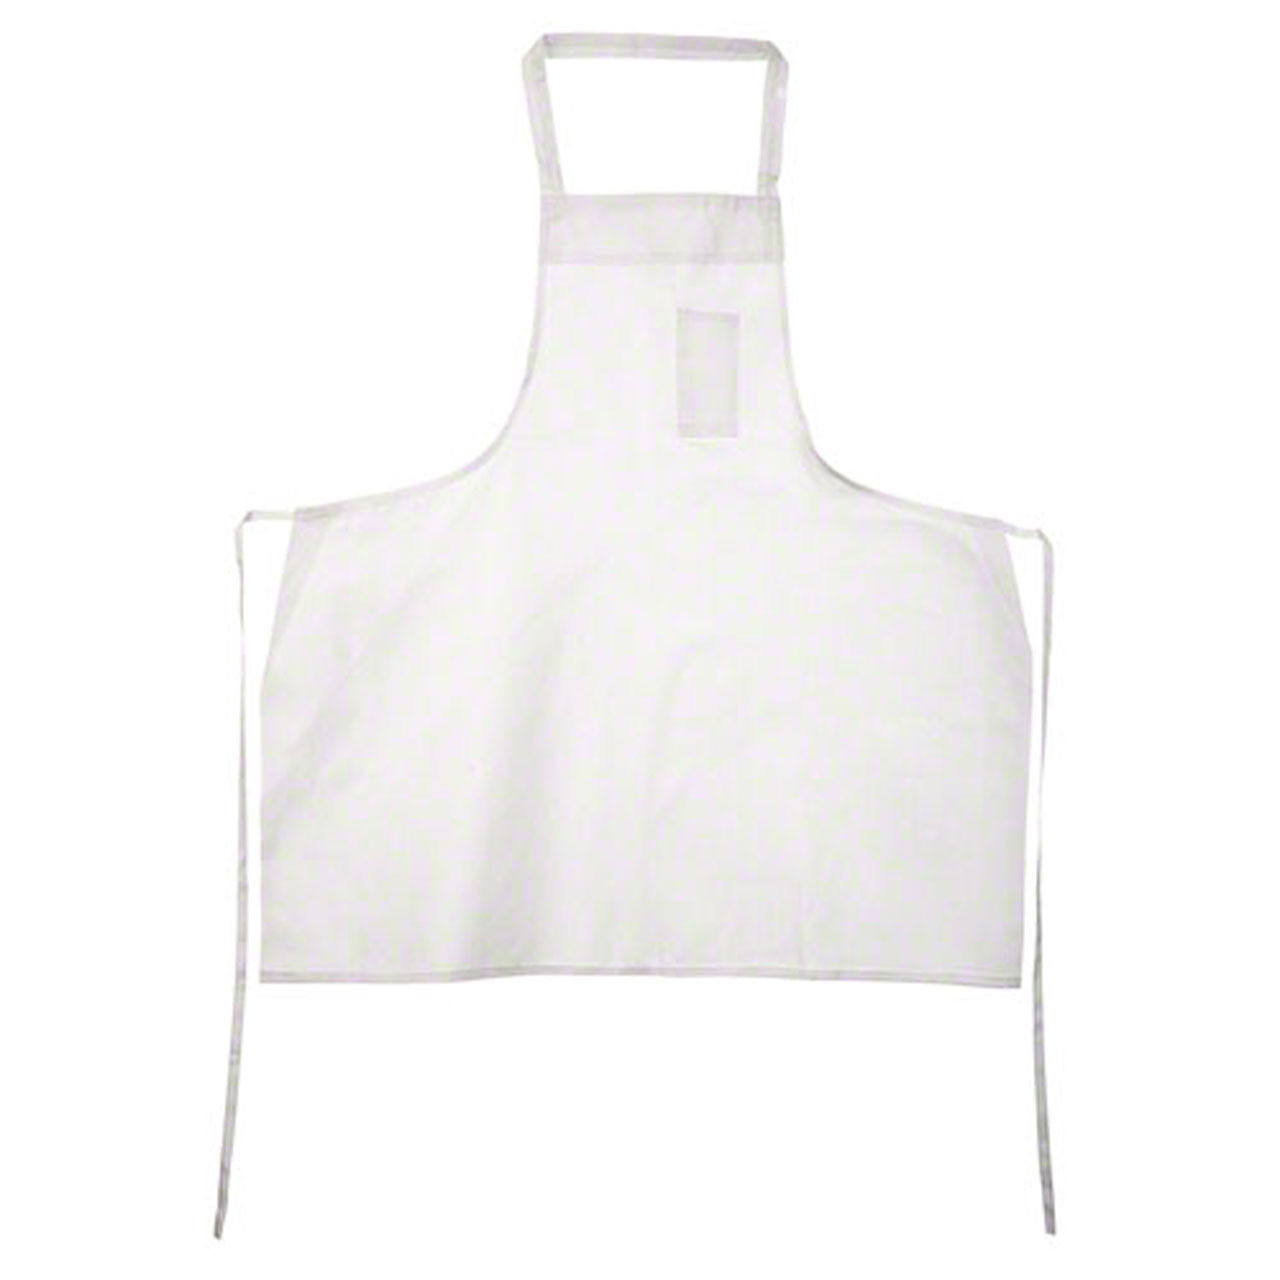 What is the selling method for cheap white aprons, specifically White Economy Bib Aprons?